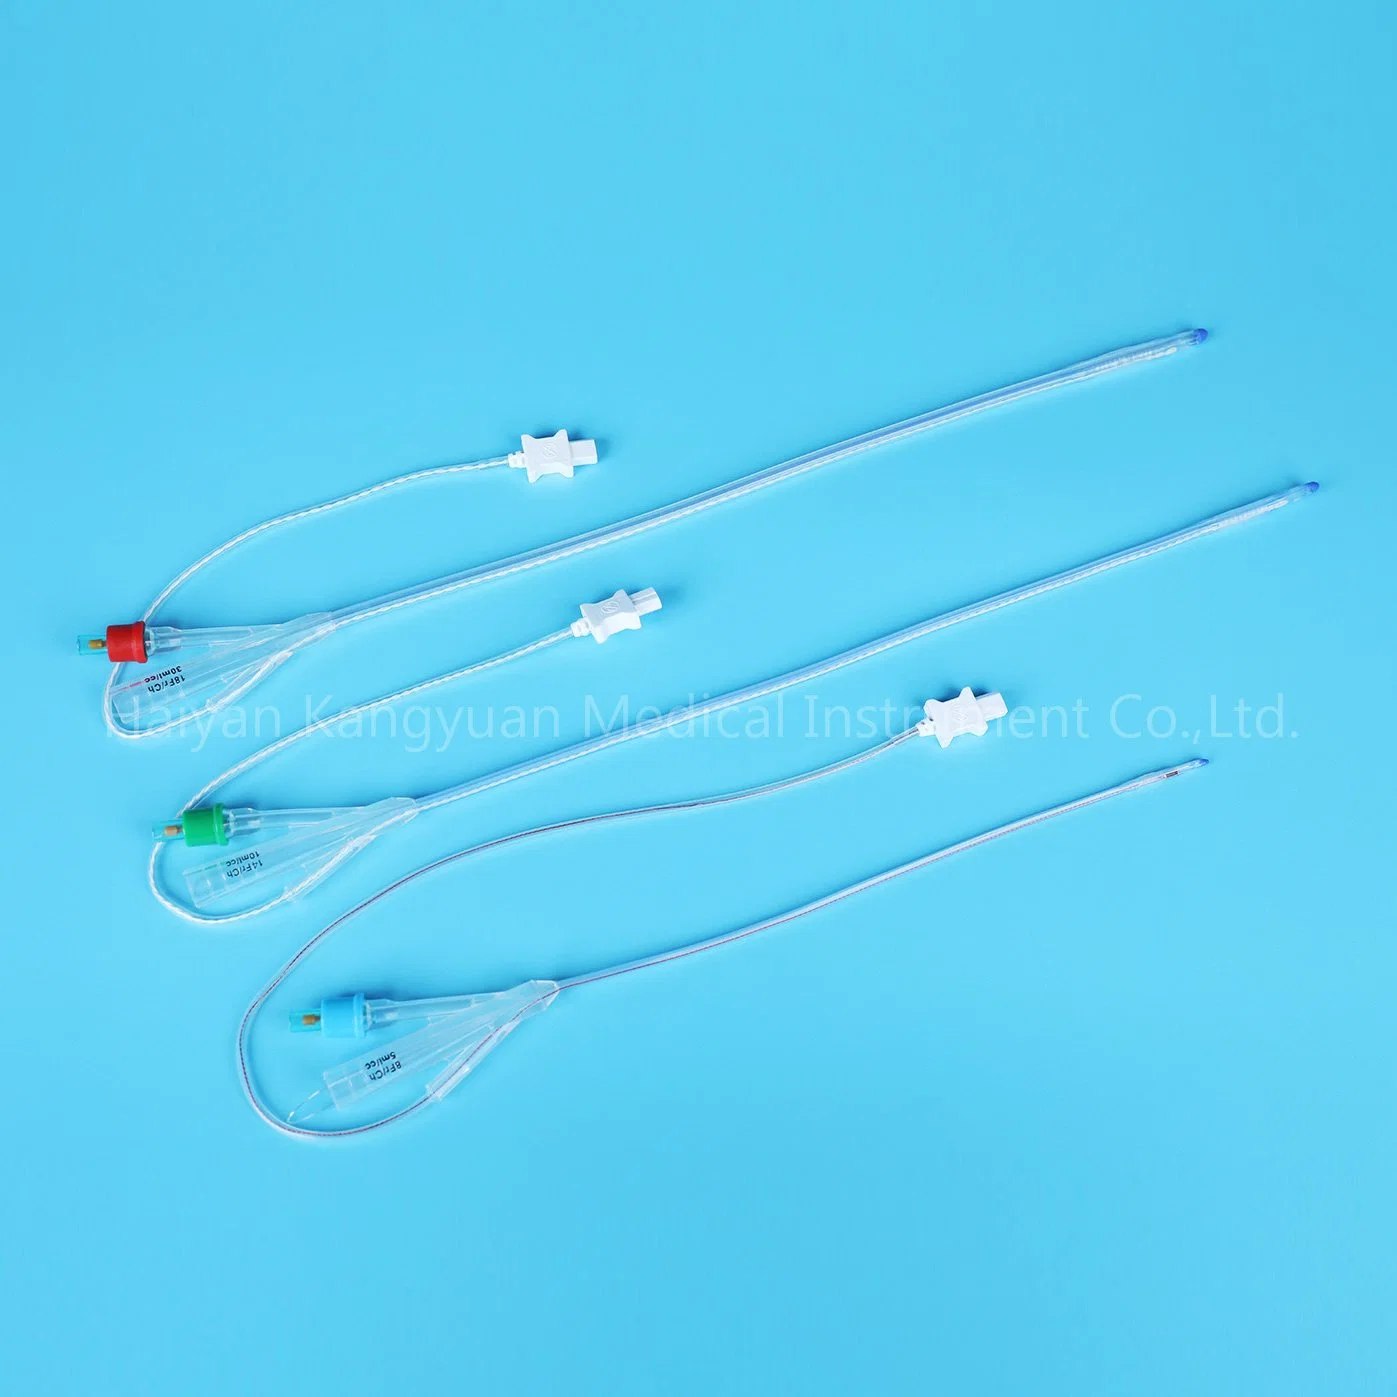 for Temperature Monitoring Urethral Use Silicone Urinary Foley Catheter with Temperature Sensor Probe Round Tipped